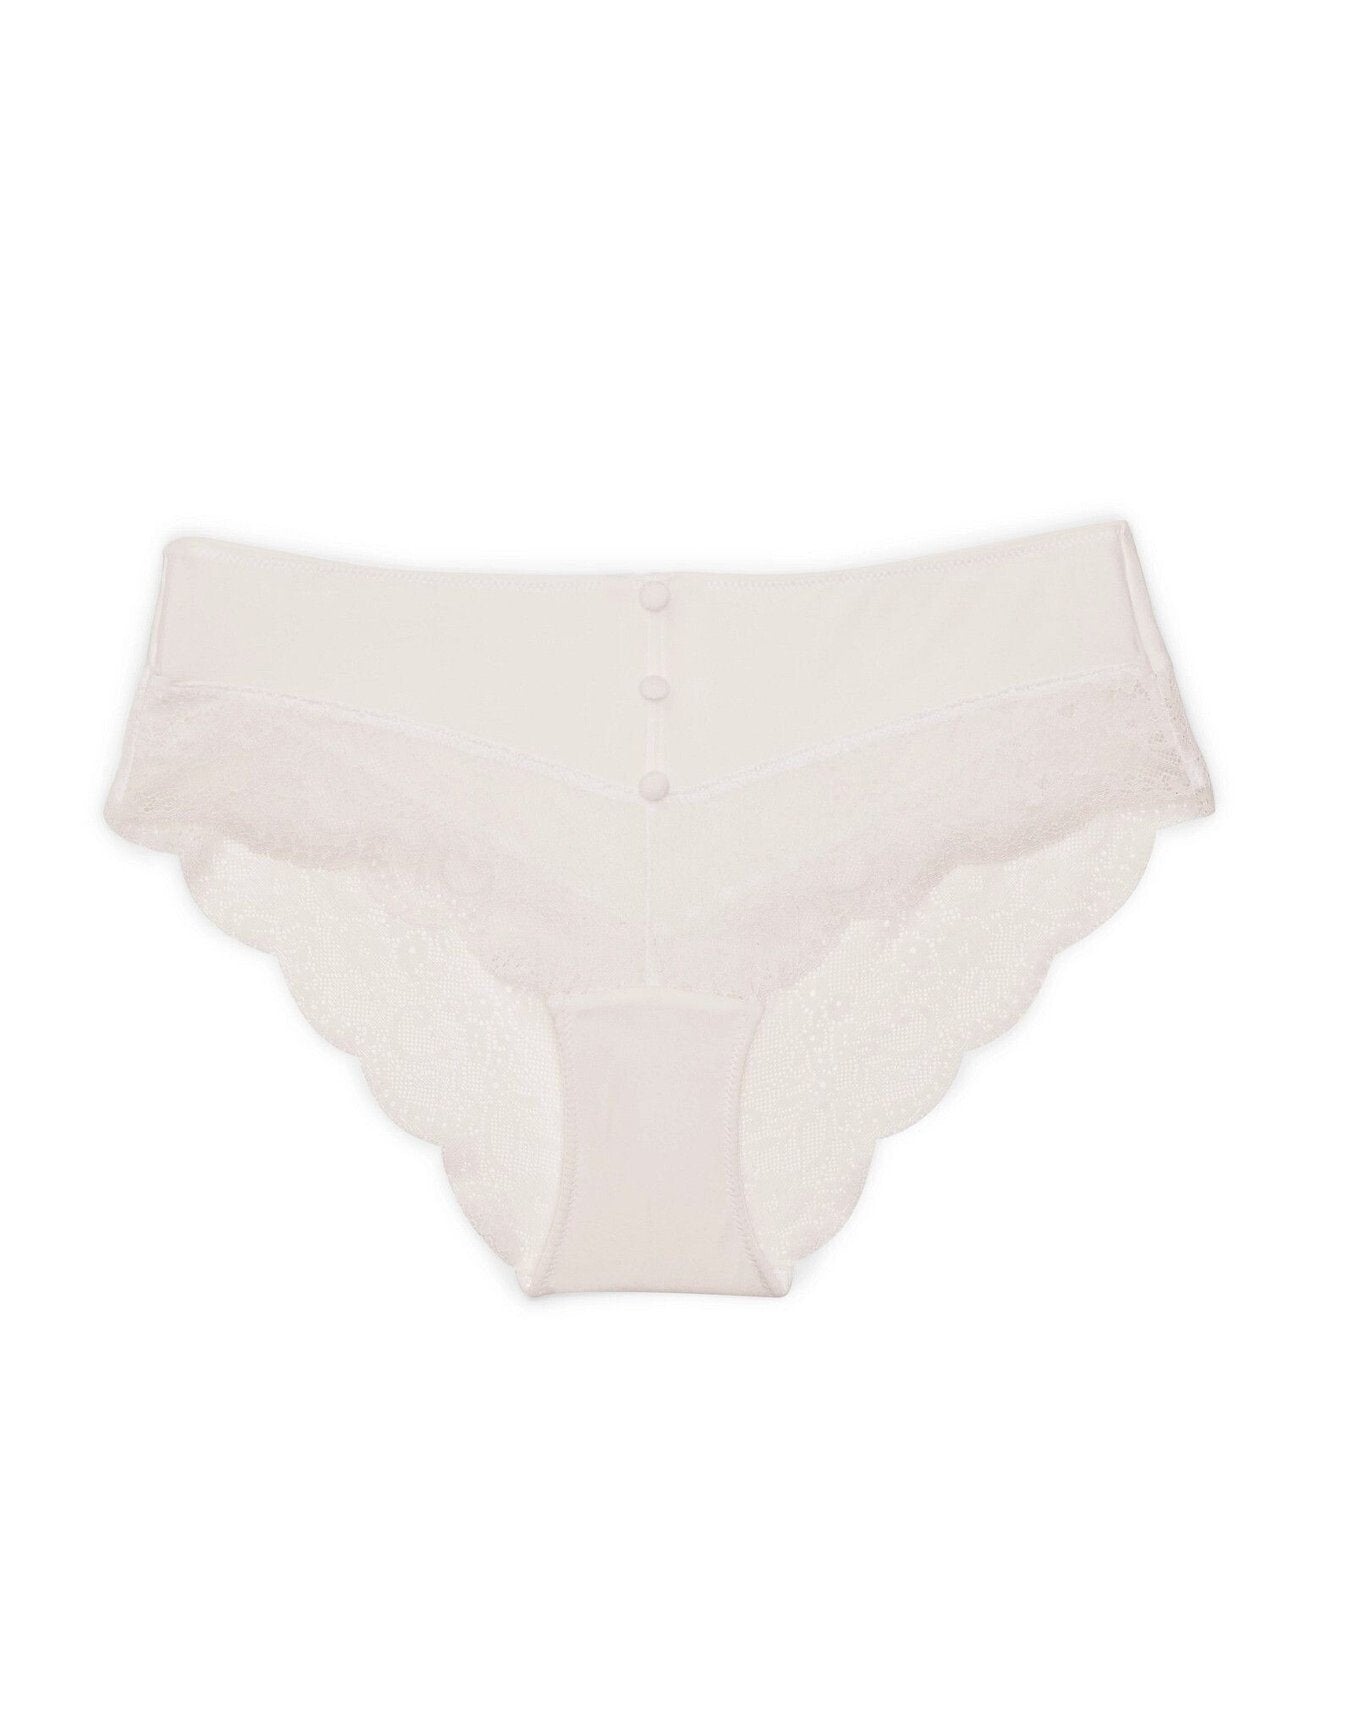 Adore Me Anja Hipster in color Whisper White and shape hipster